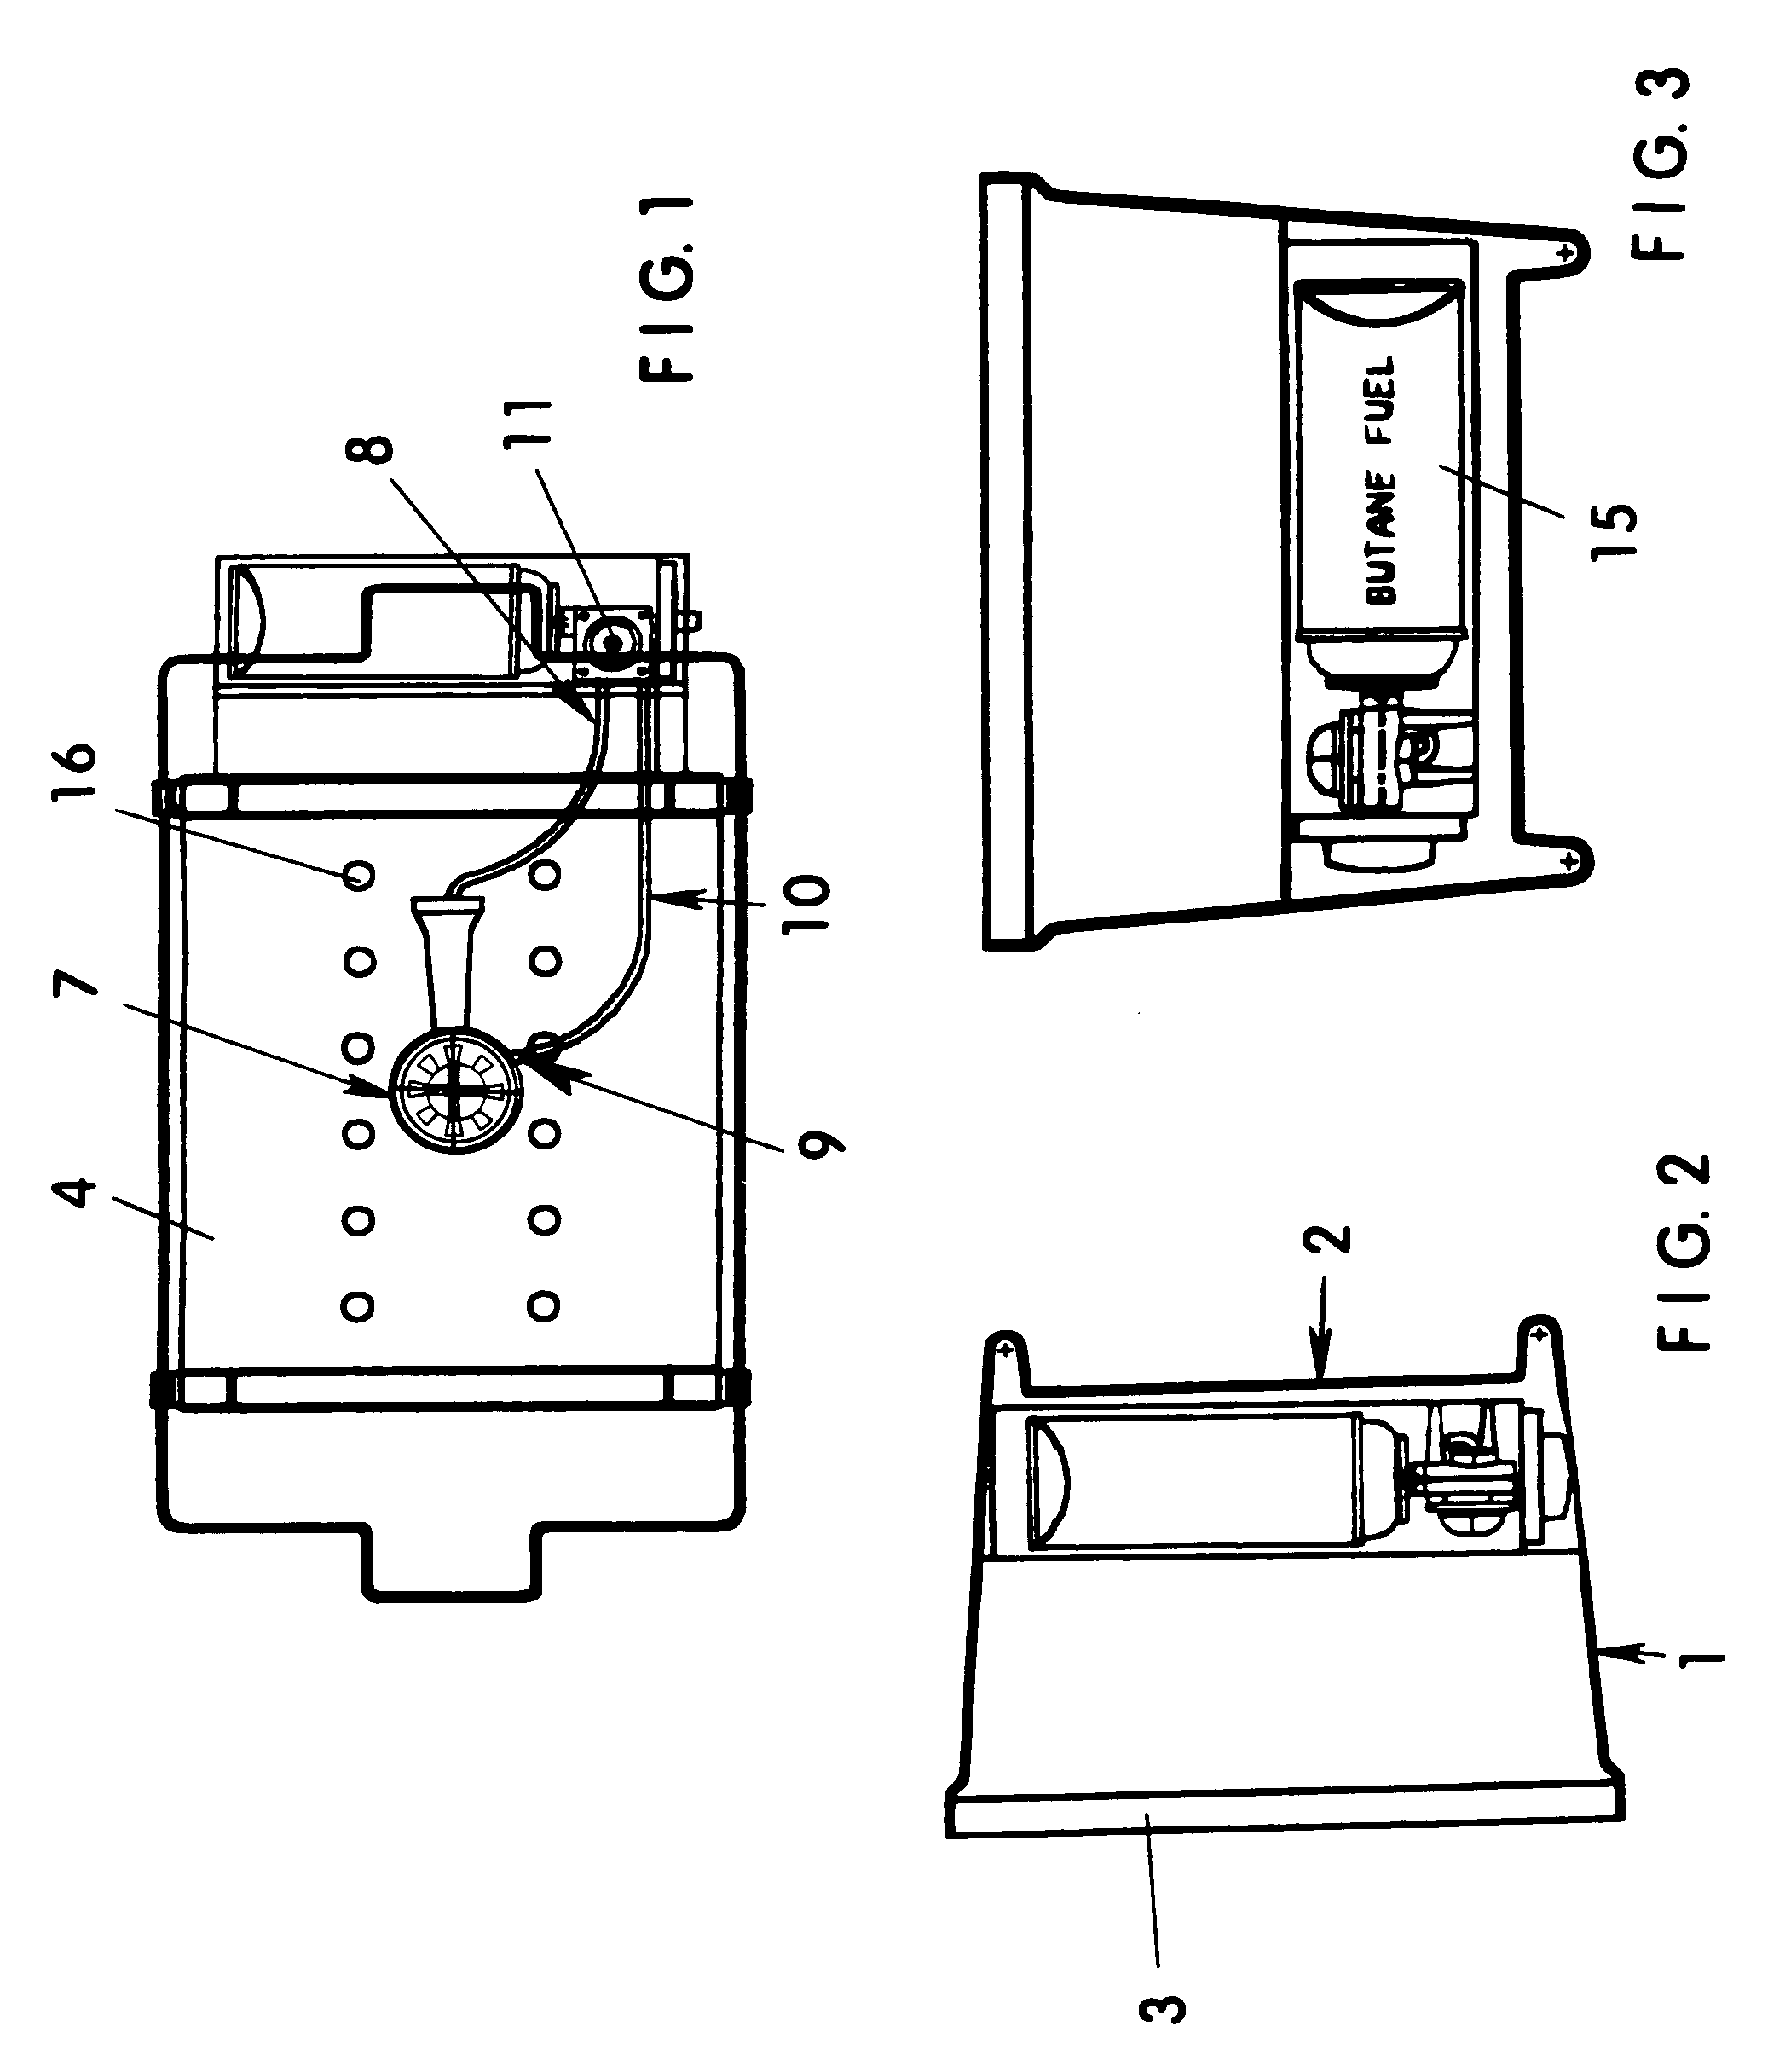 Machine for heating catered food items utilizing a butane gas heat source with burner control mechanism ("temperature controlled butane chafing dish")